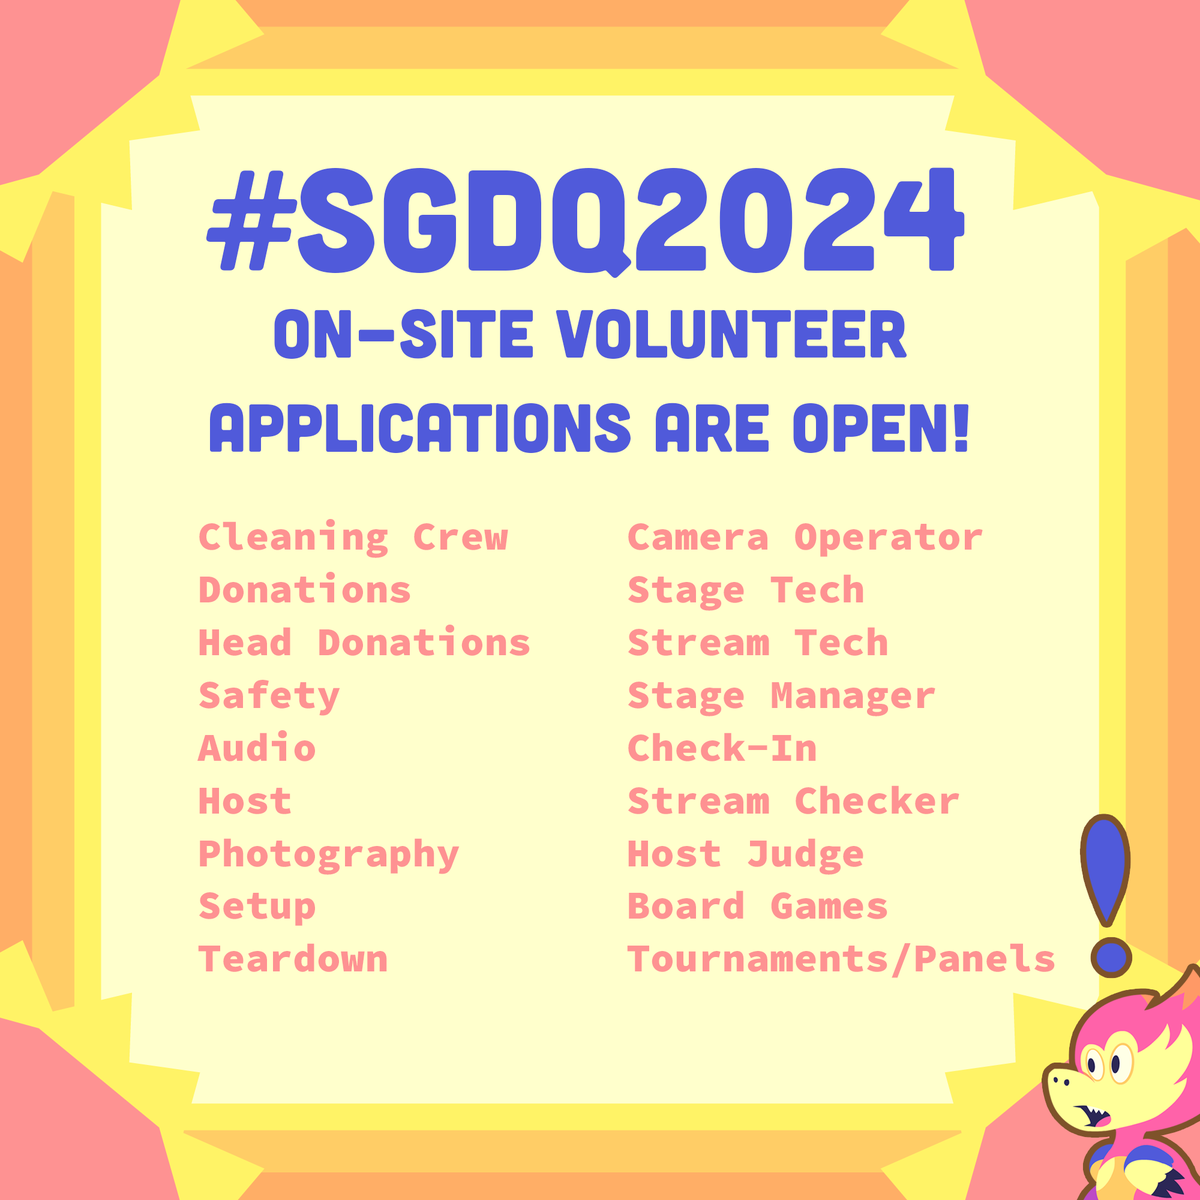 On-site volunteering applications for #SGDQ2024 are open now until April 14th at 11:59PM PT! Apply here: gamesdonequick.com/profile Stay tuned for a few remote positions opening soon!